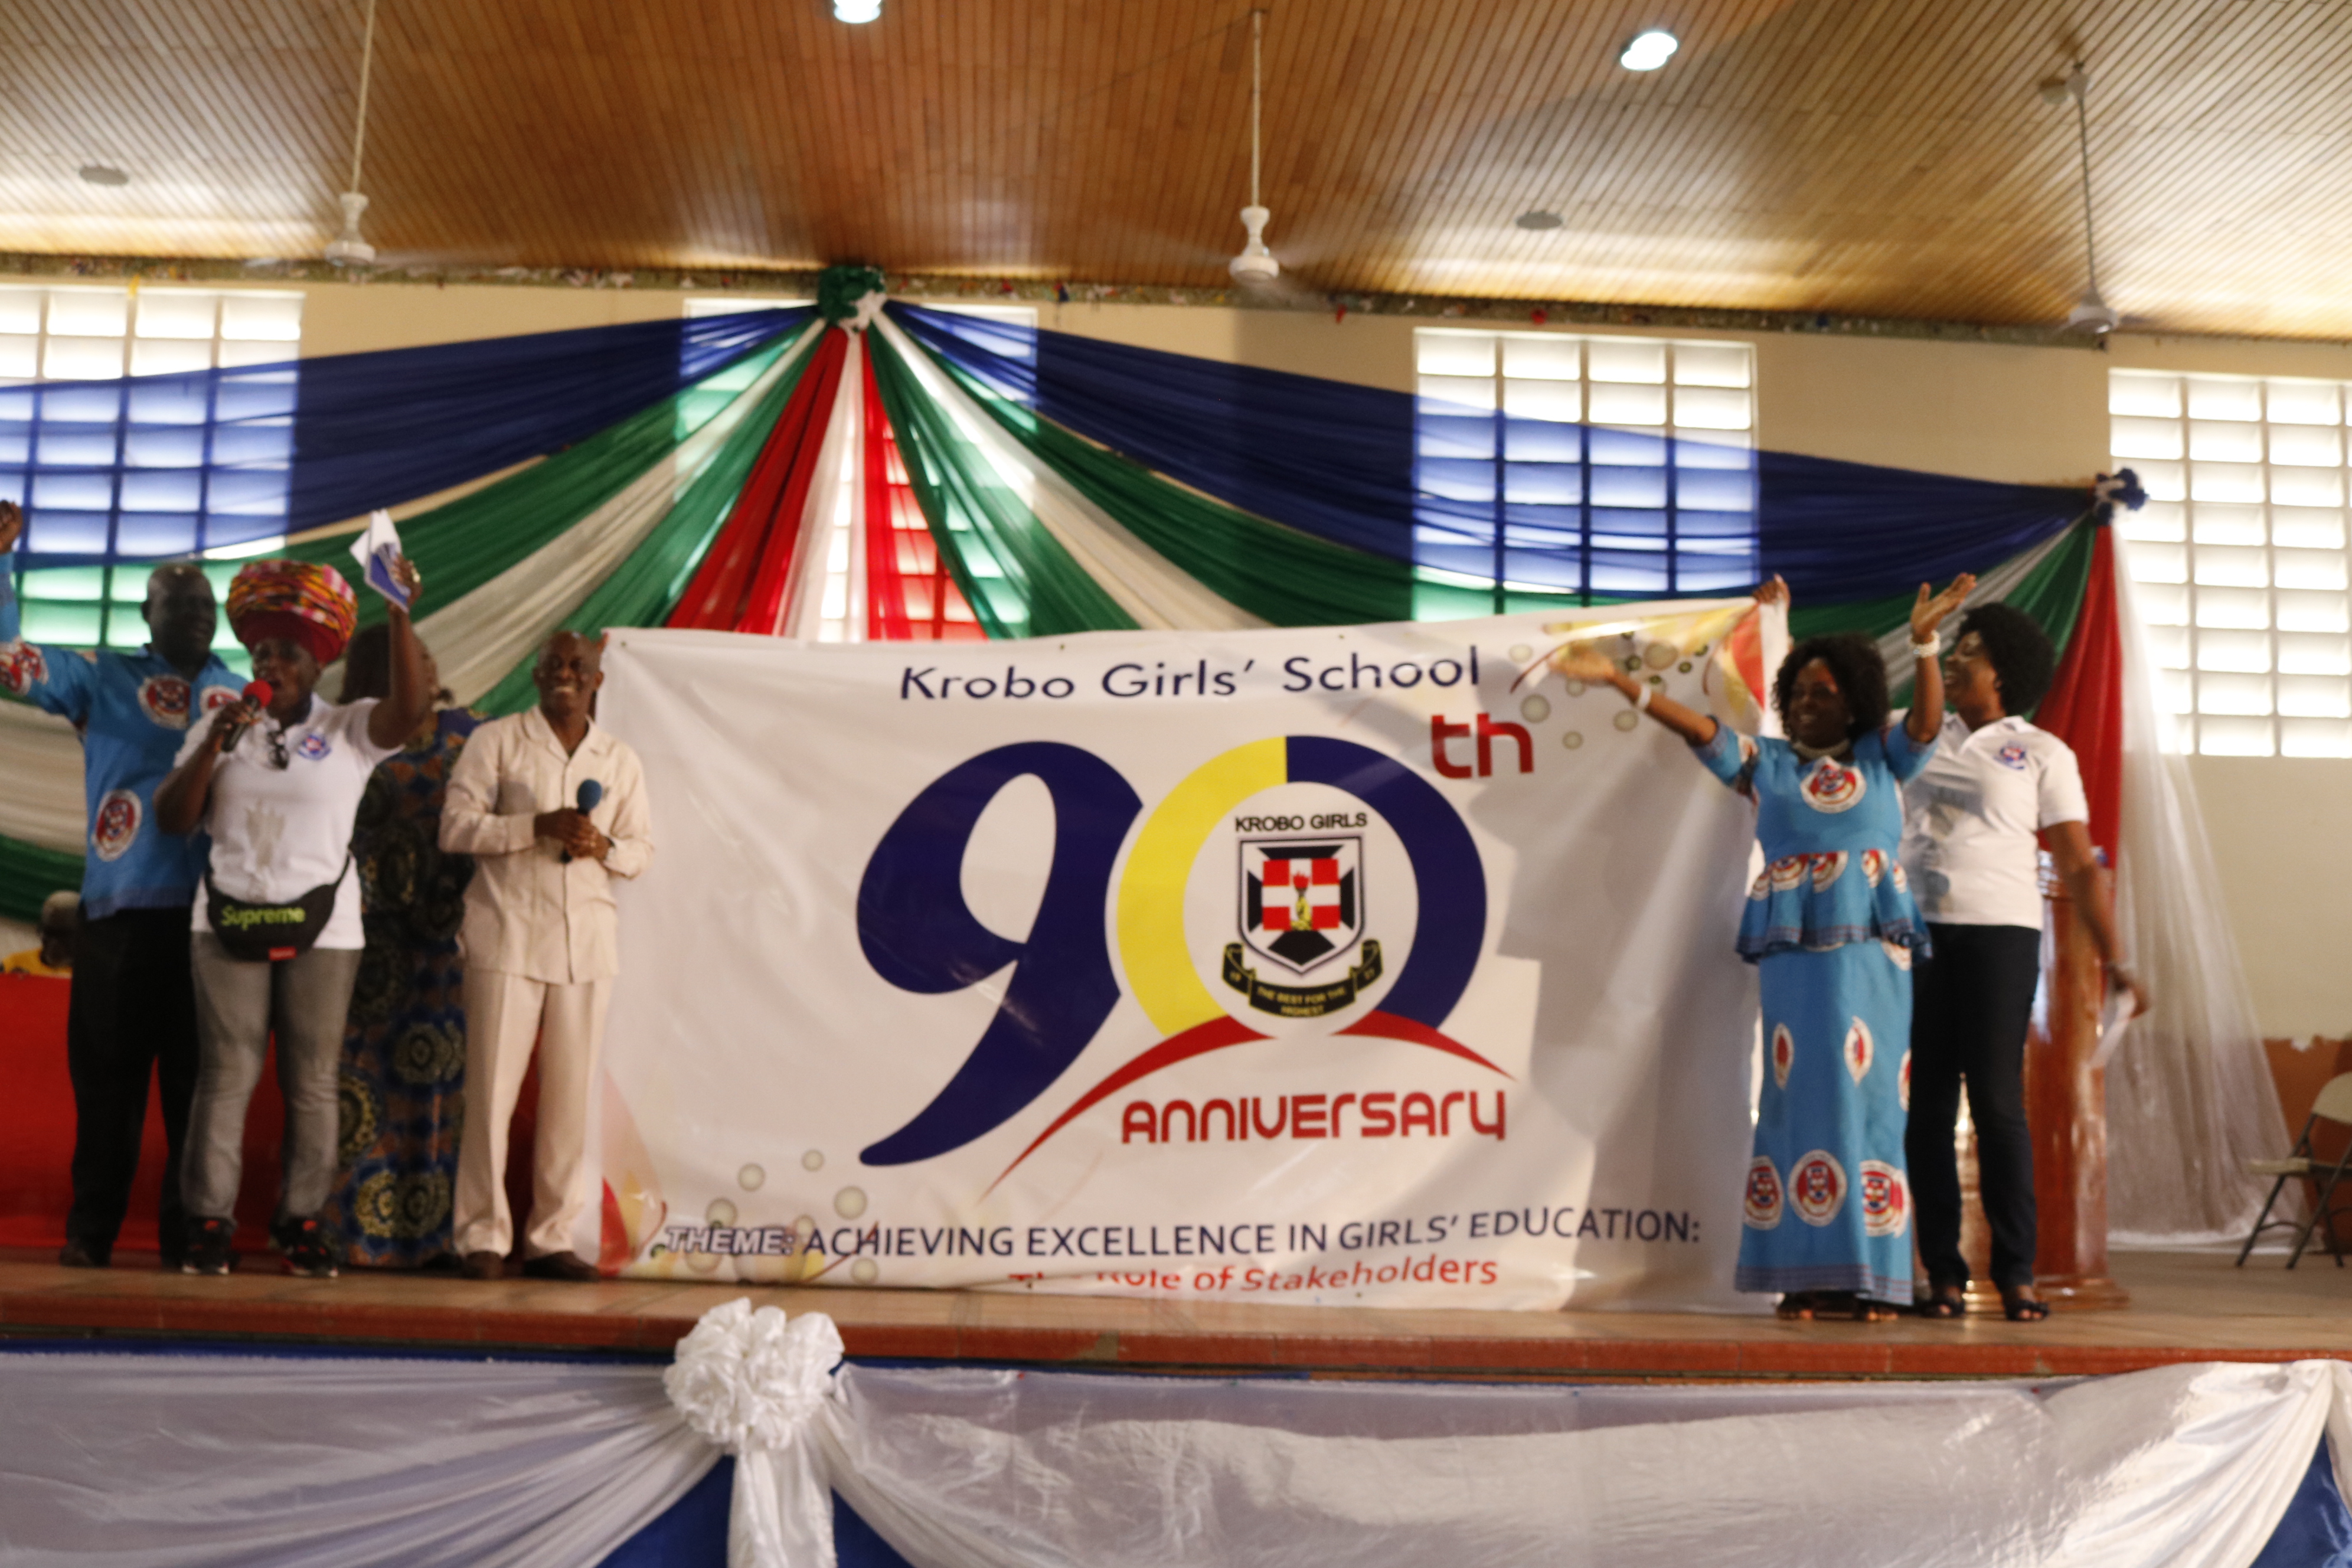 The Minister of Finance, Mr Seth Terpker, launching the 90th anniversary of the school. With him are other dignitaries, including the Headmistress of the School, Madam Cecilia Obenewaa Appiah, (2nd right)